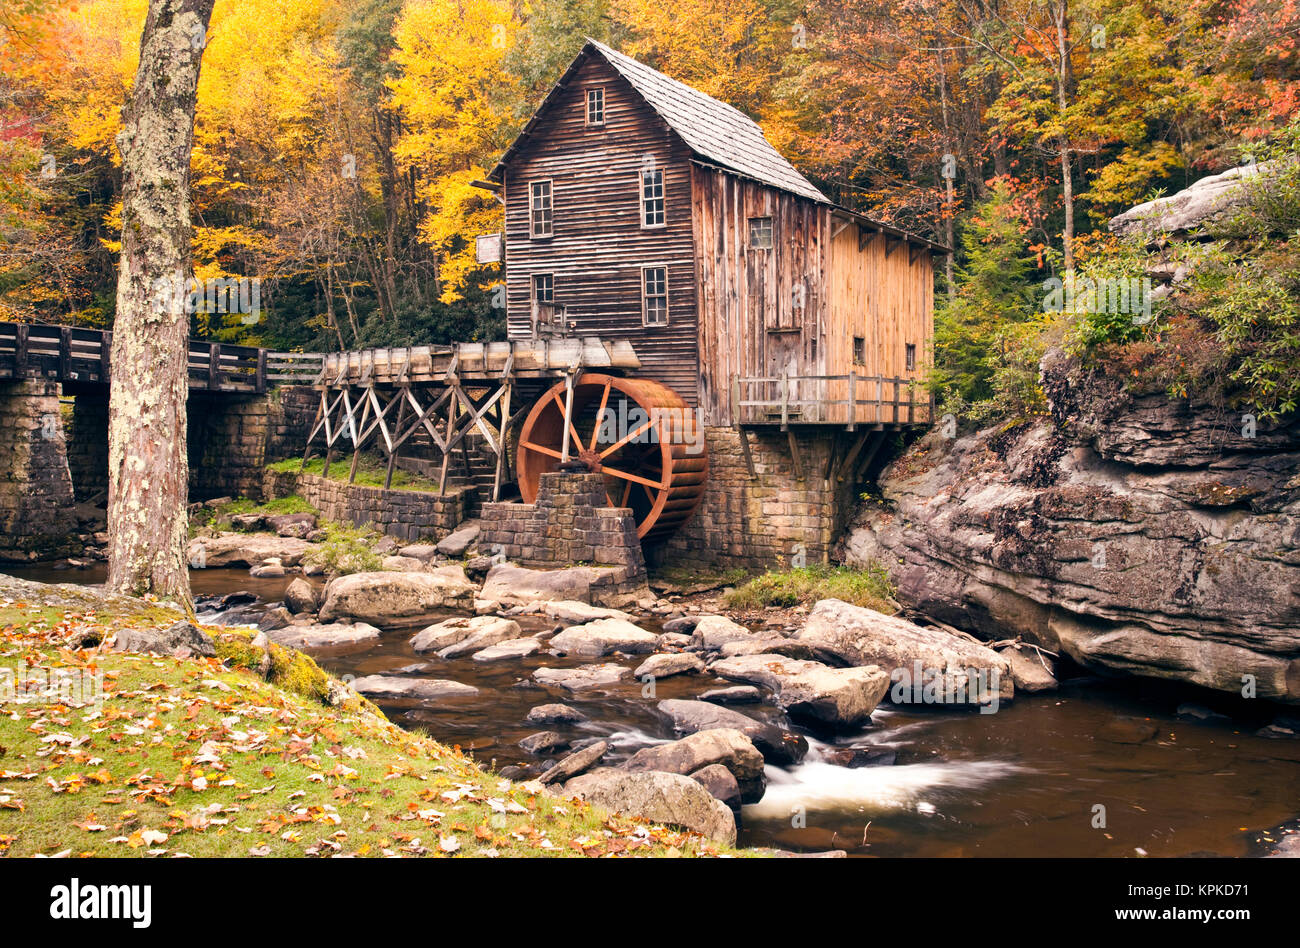 USA, West Virginia, Clifftop. Babcock State Park, The Glade Creek Grist Mill, autumn. Stock Photo